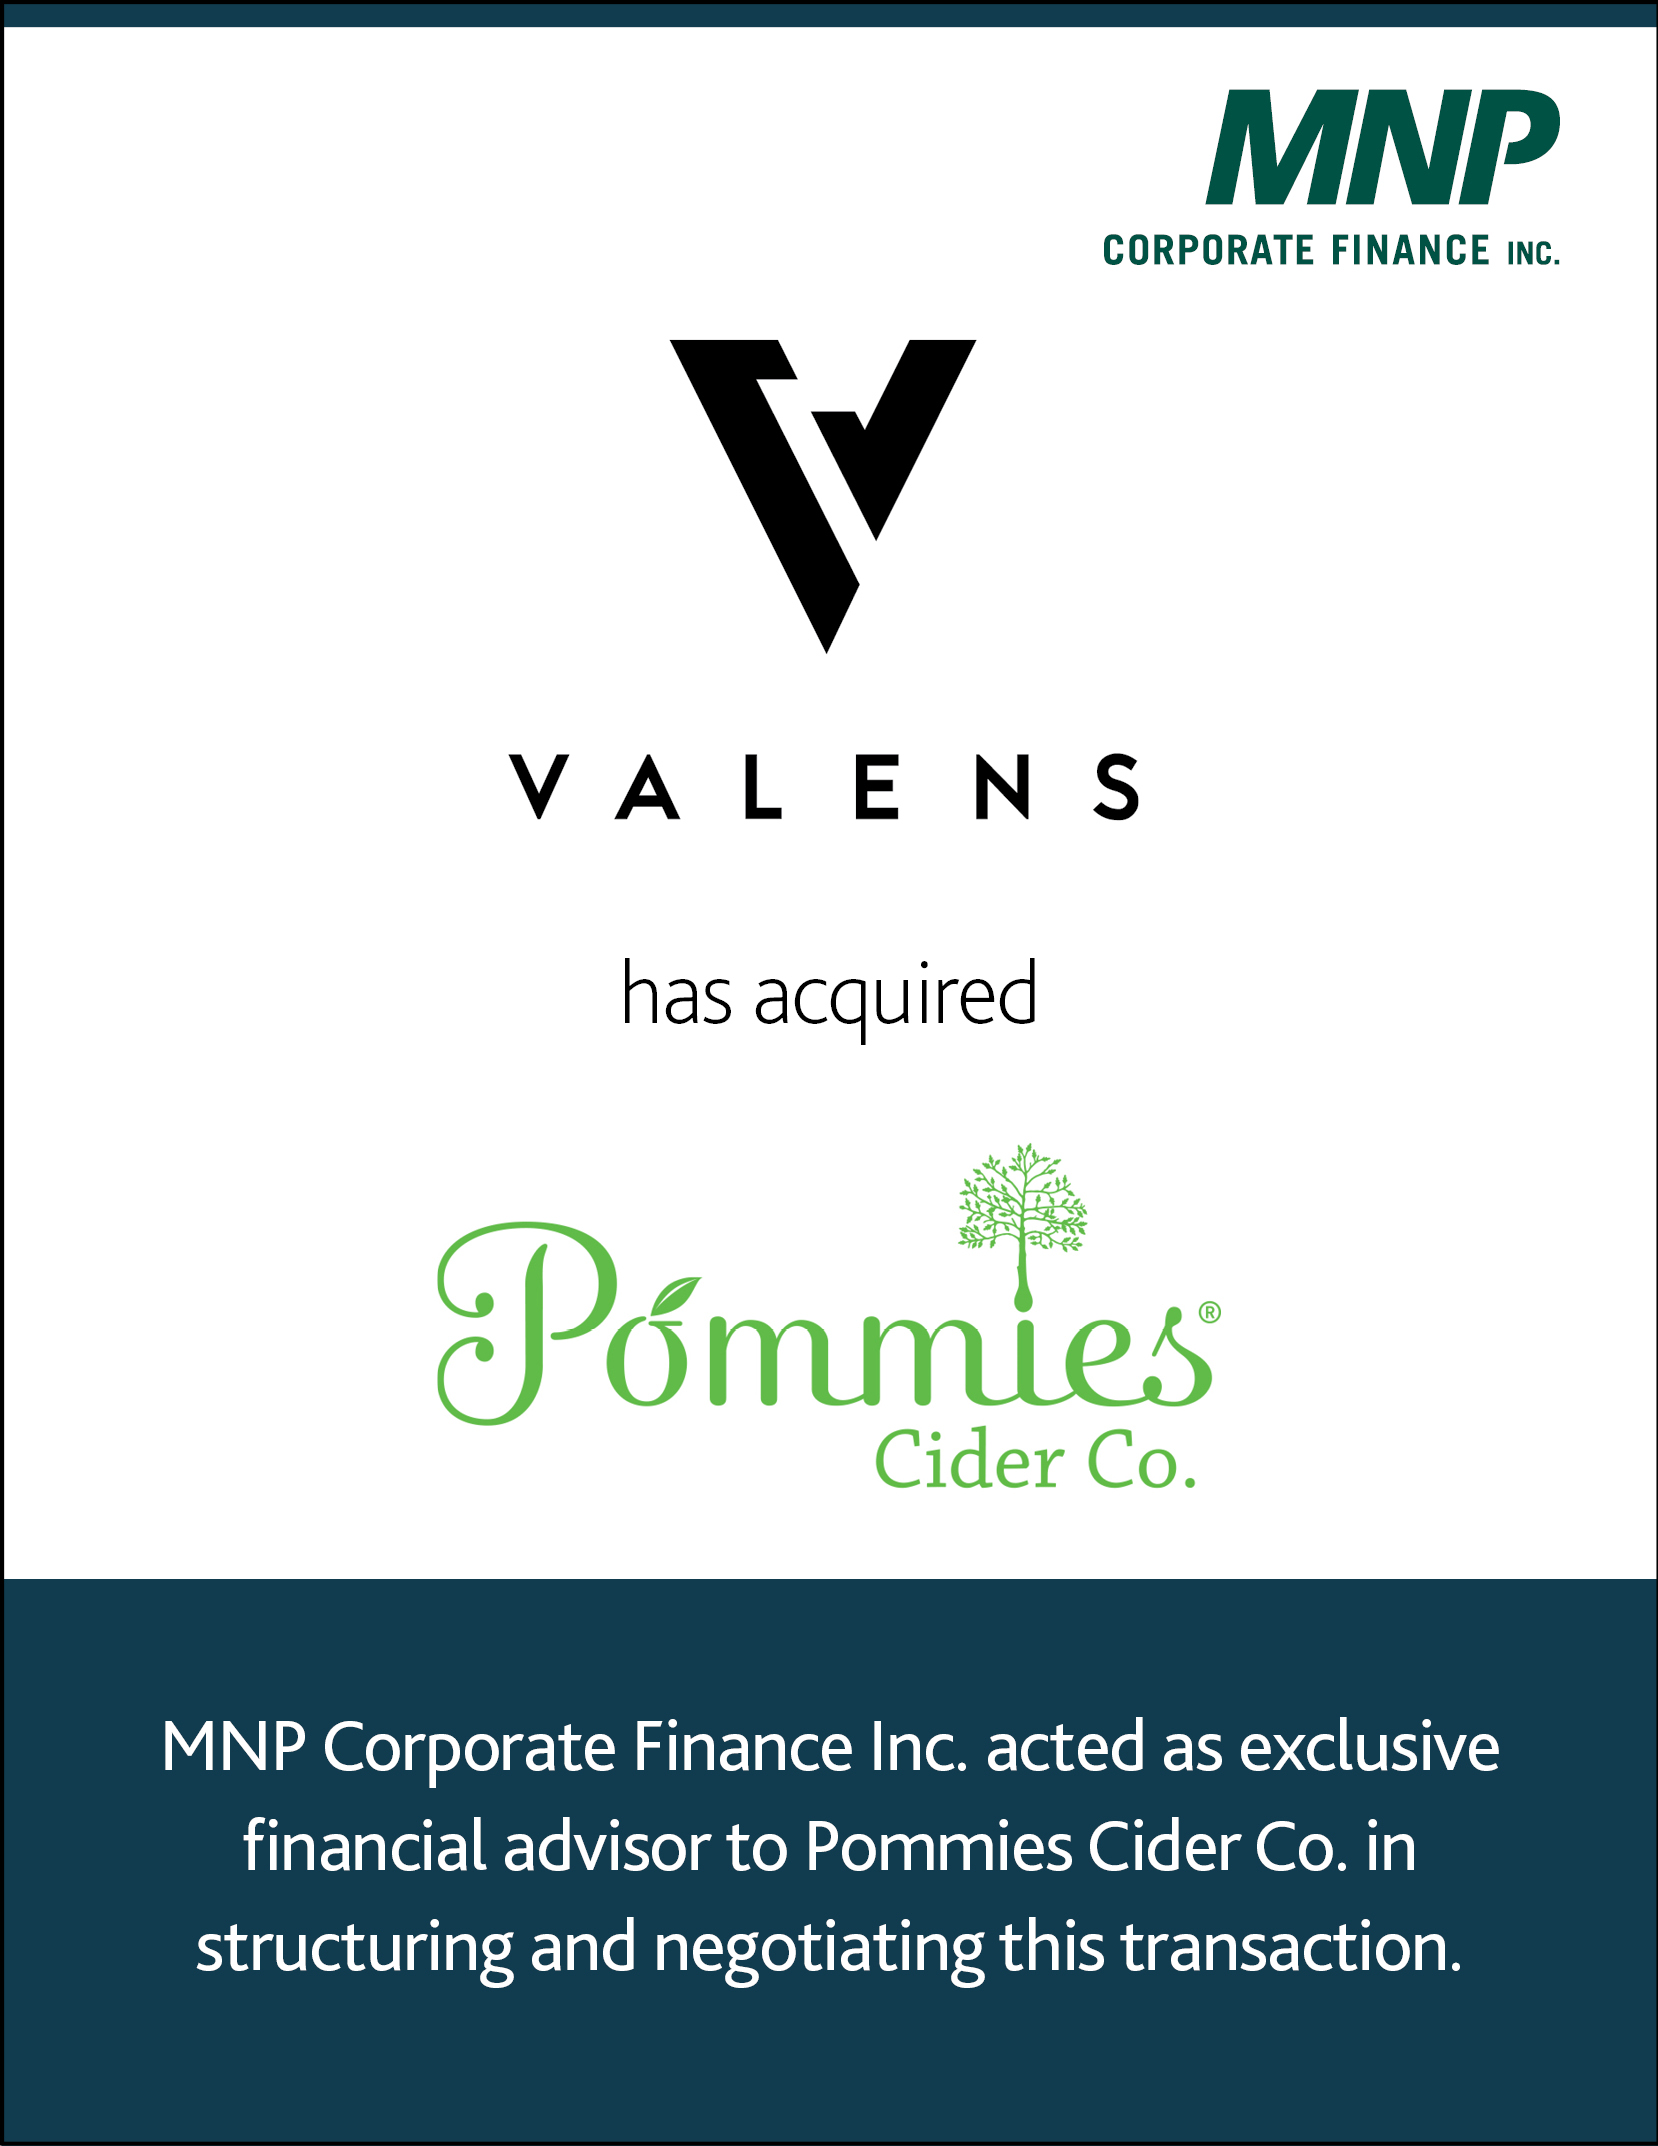 Valens has acquired Pommies Cider Co. MNP Corporate Finance Inc. acted as exclusive financial advisor to Pommies Cider Co. in structuring and negotiating this transaction